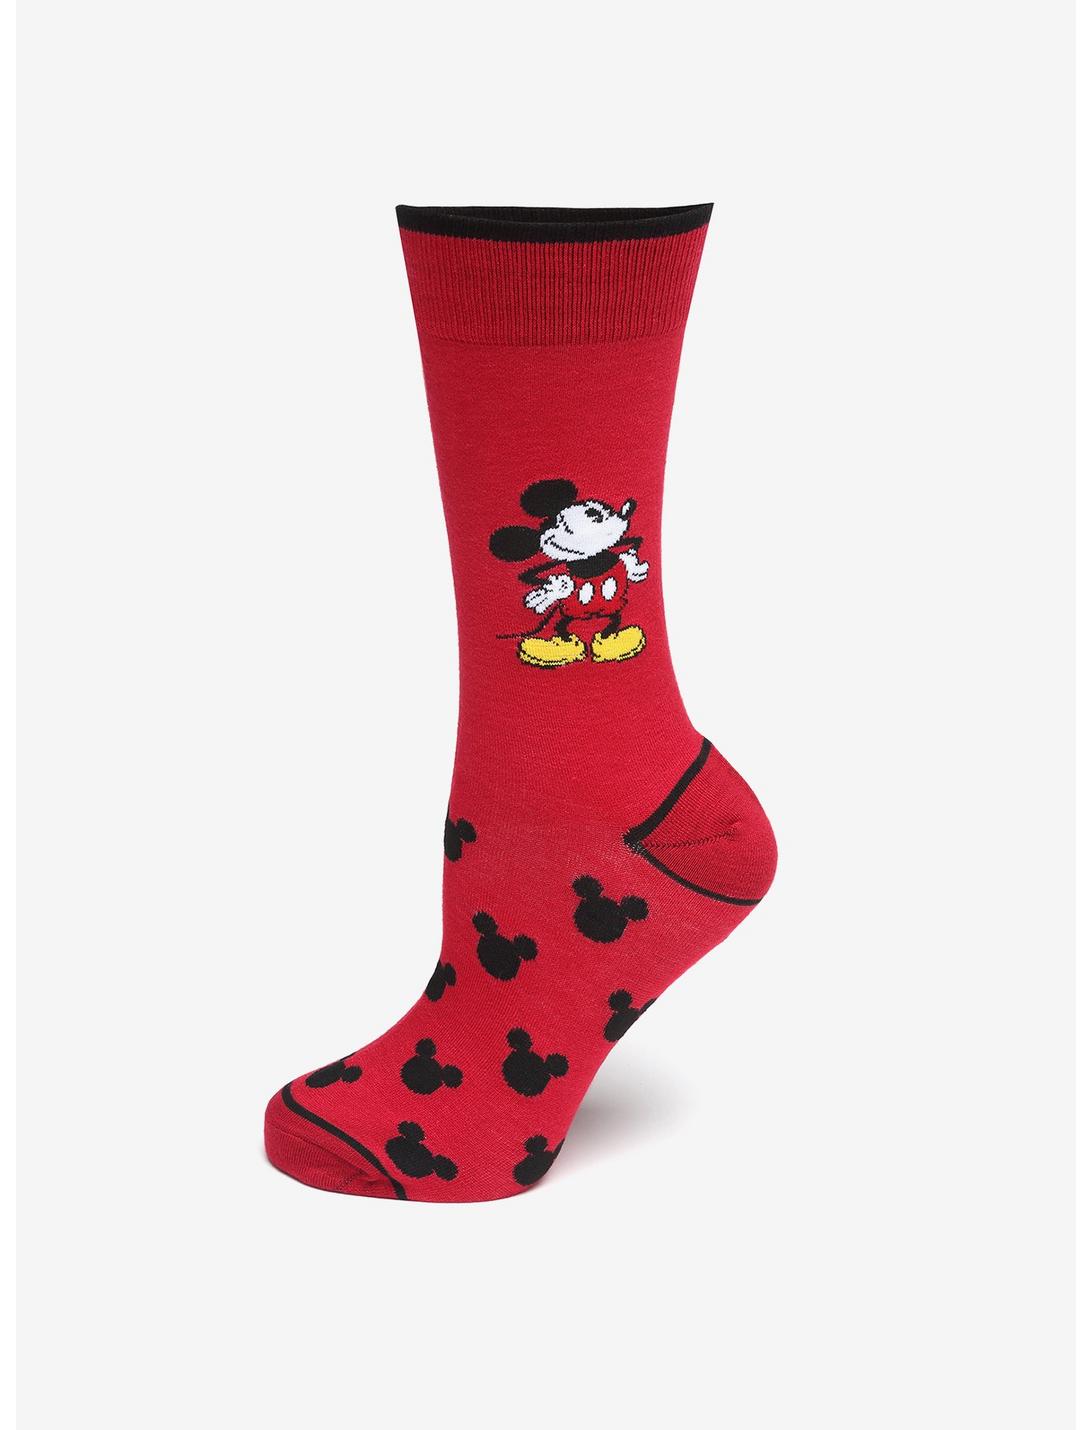 Disney Mickey Mouse Pie-Eyed Red Socks, , hi-res